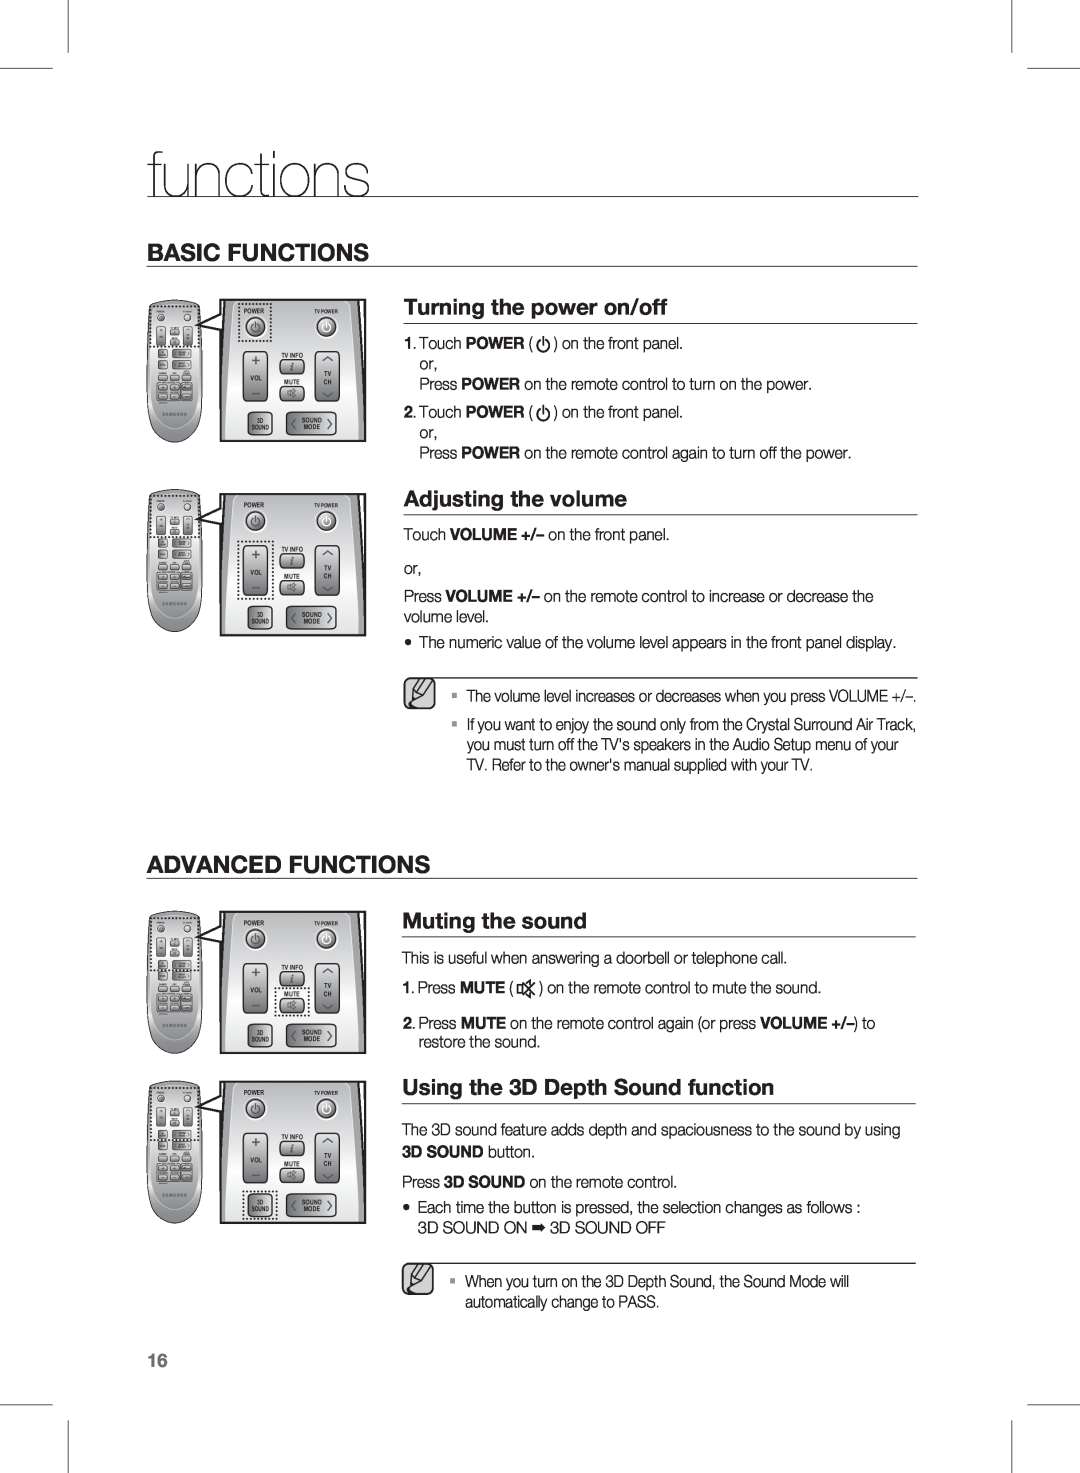 Siemens HW-D450 basic functions, advanced functions, Turning the power on/off, Adjusting the volume, Muting the sound 